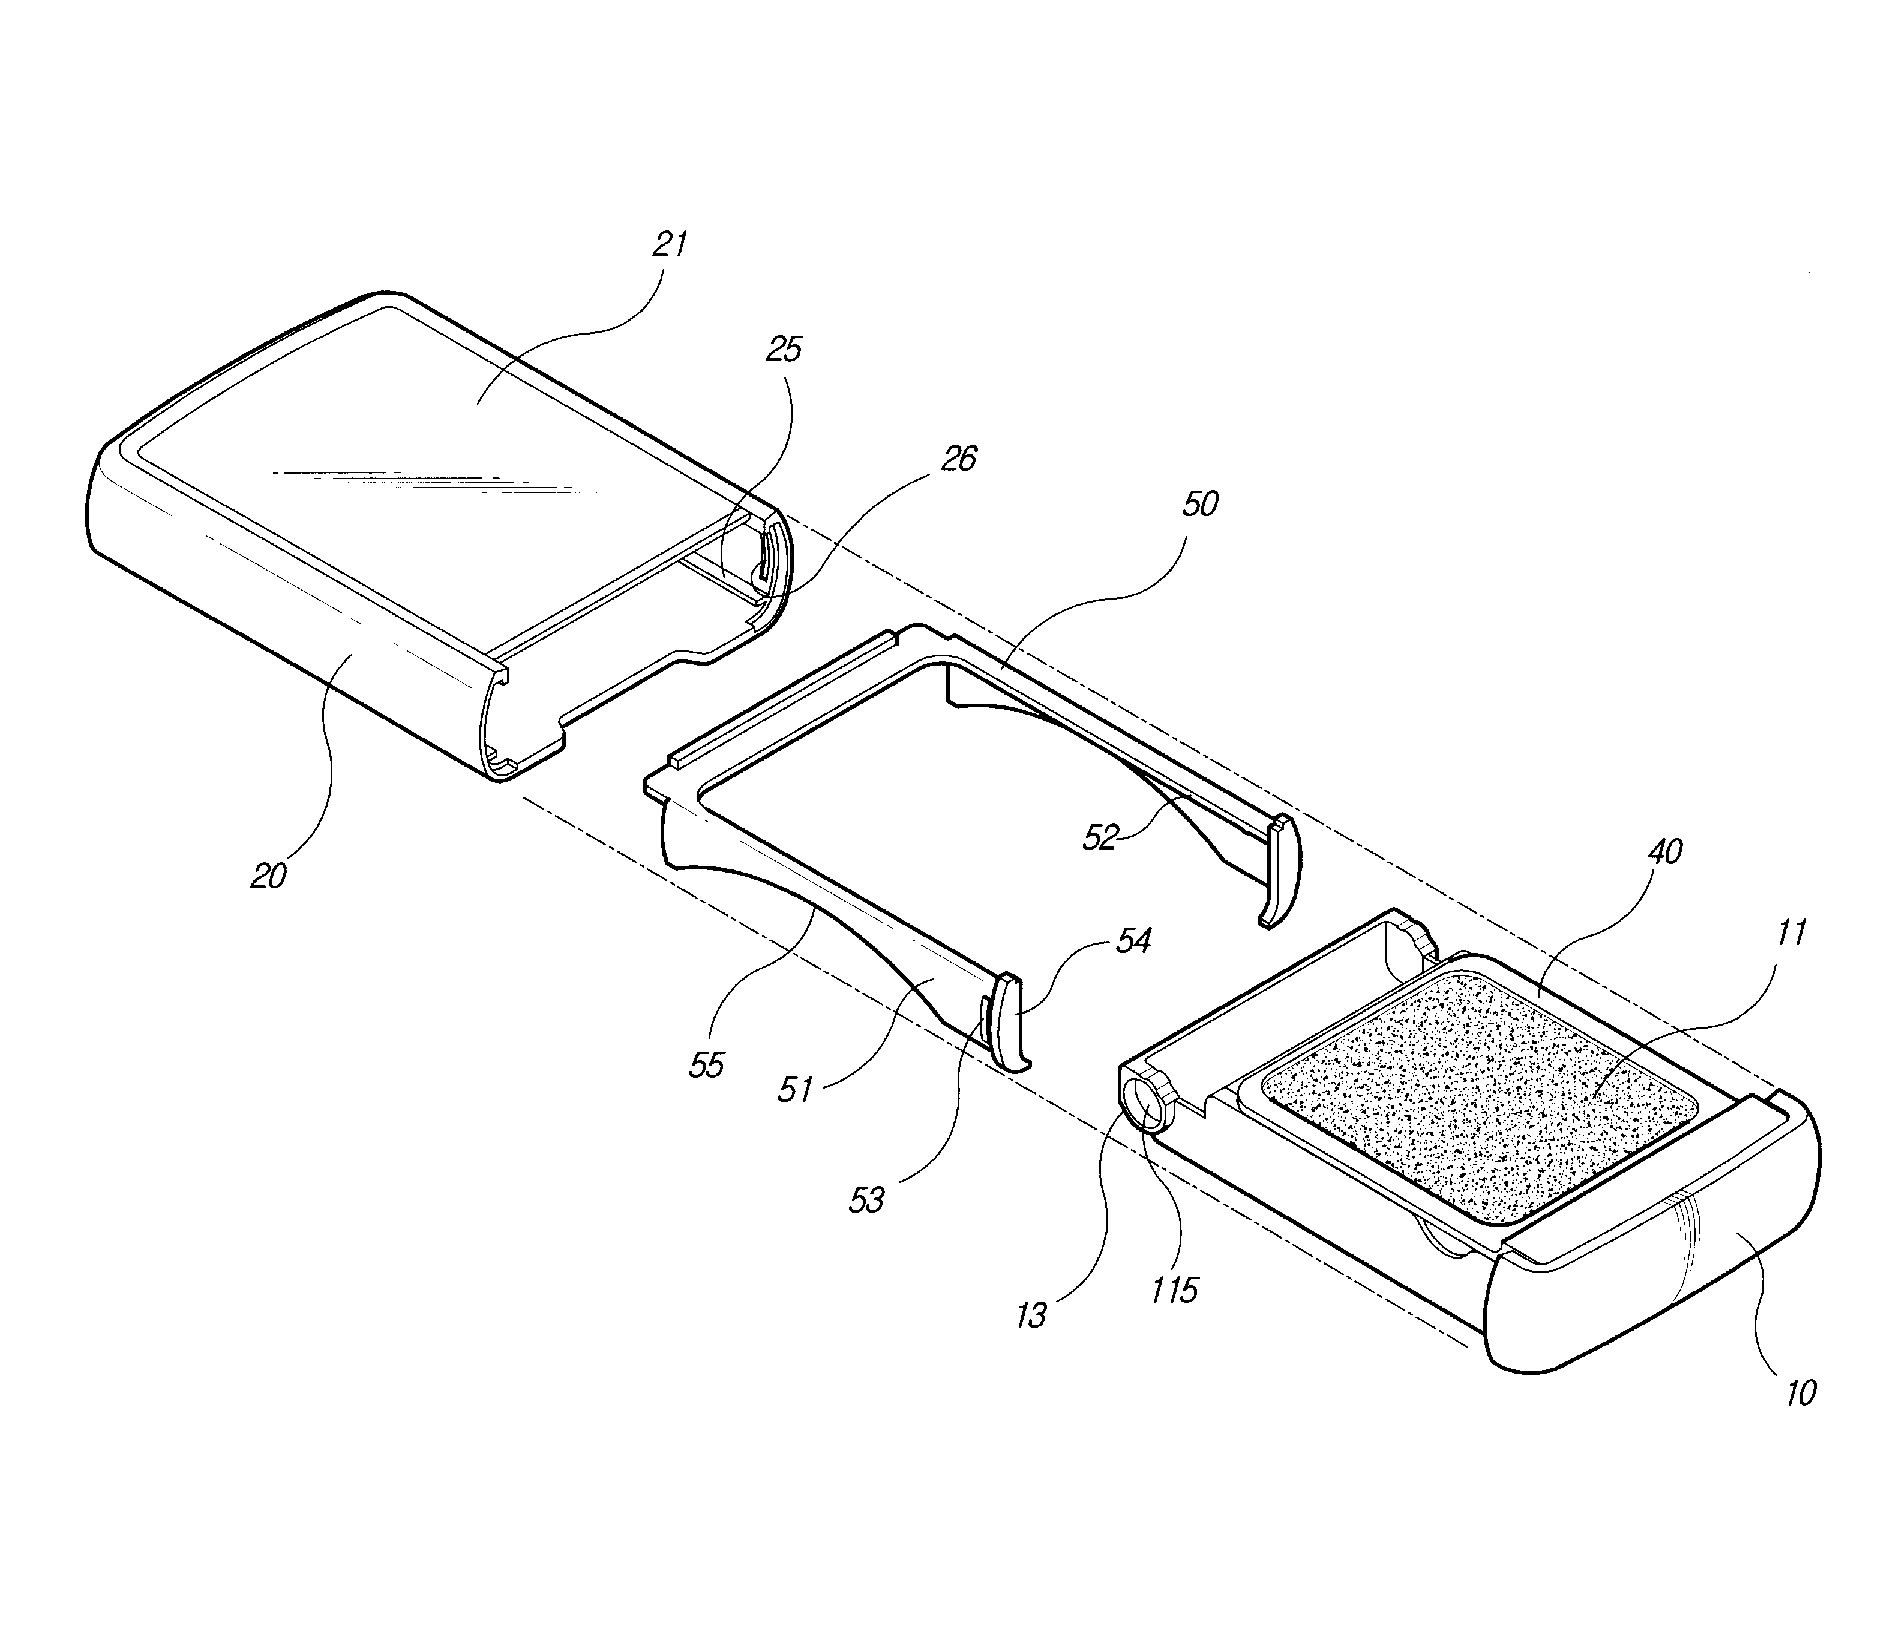 Compact having slidable in and out structure of content case